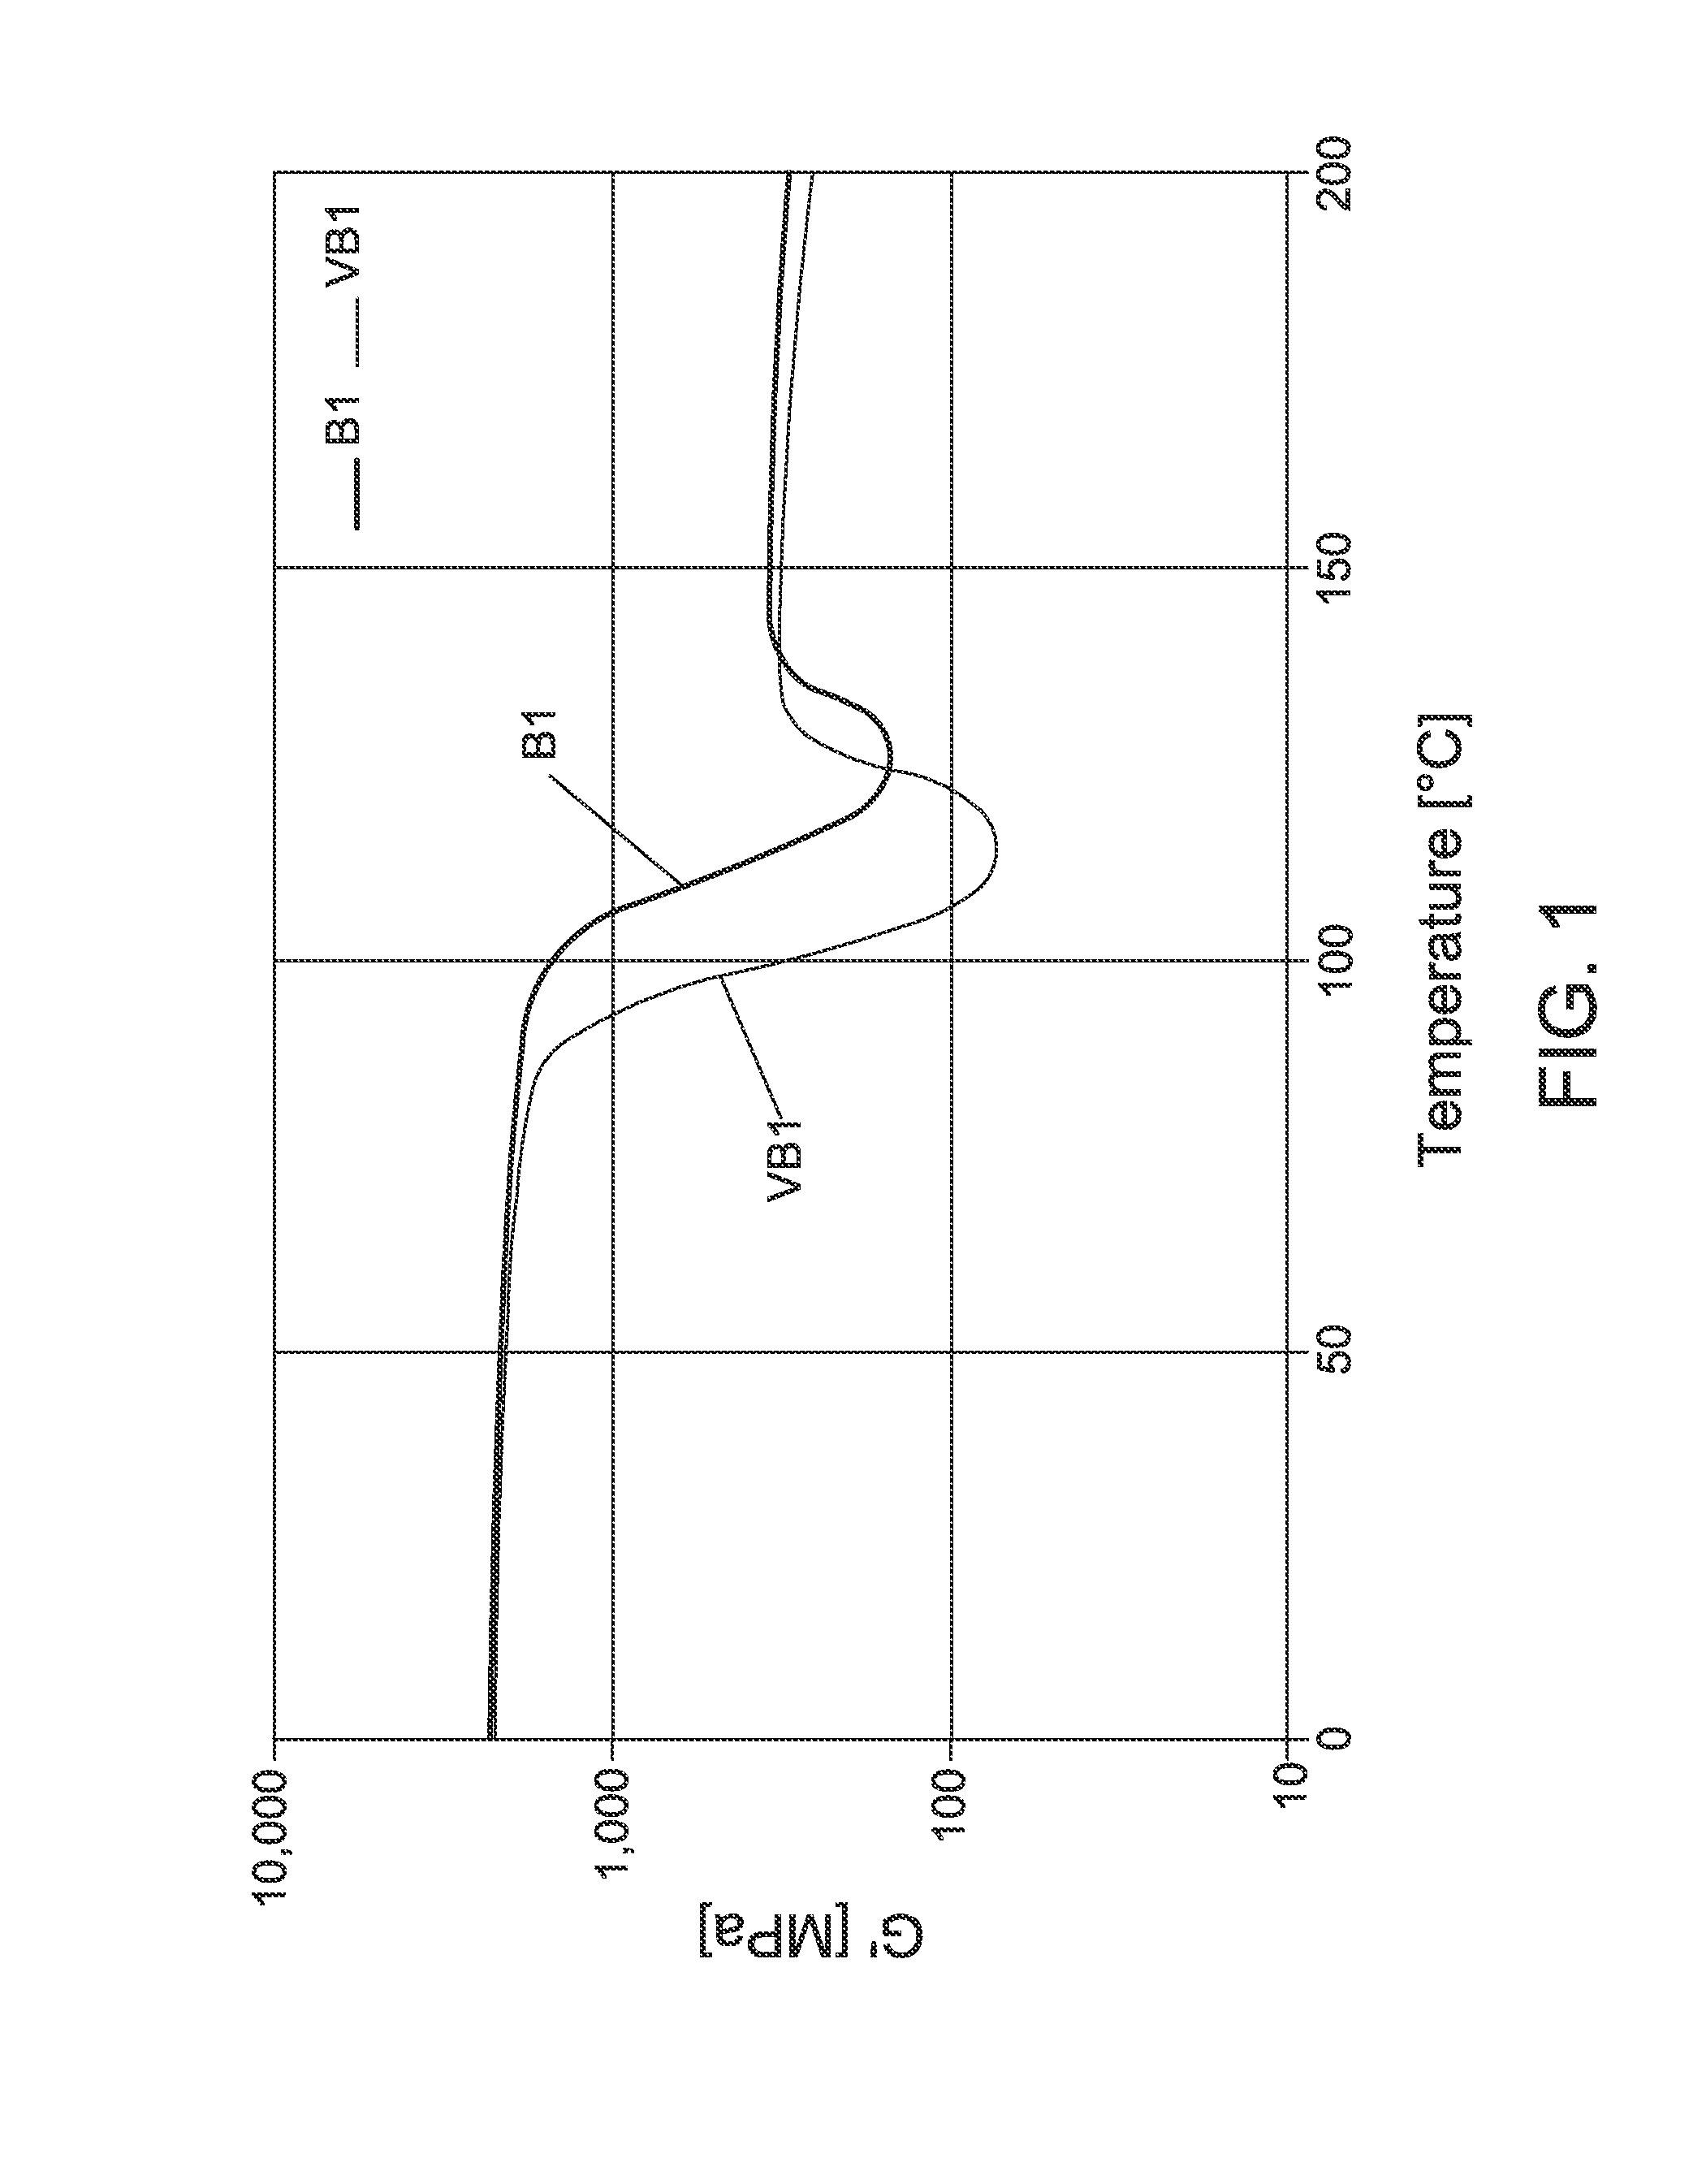 Polyamide molding material and moldings manufactured from same